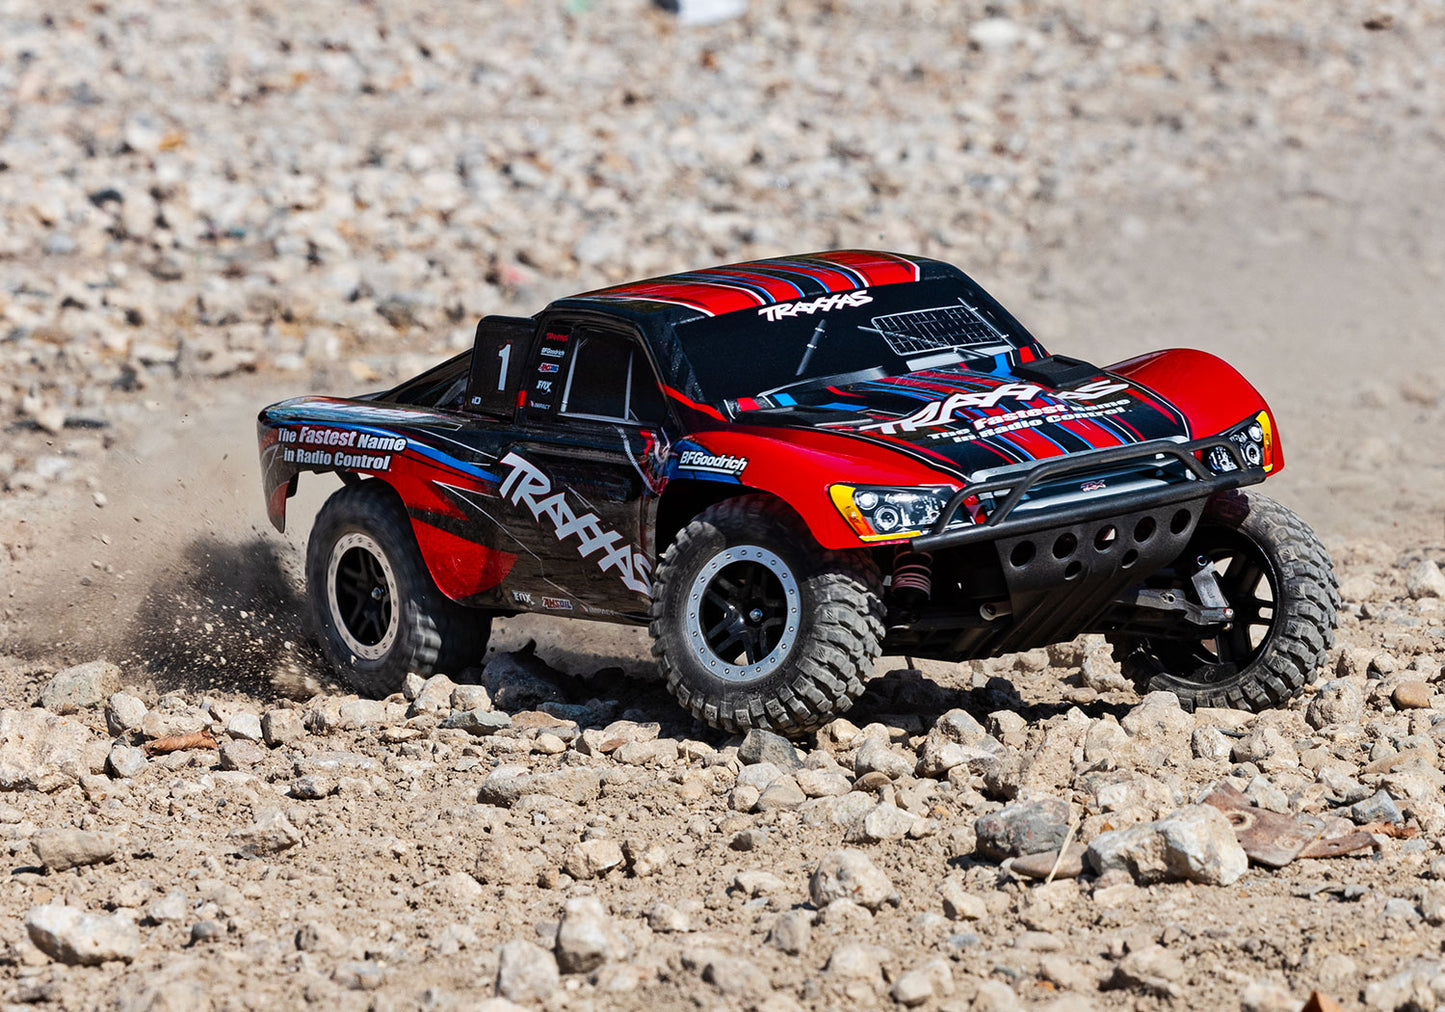 58134-4 Traxxas Slash 2WD BL-2s: Short Course Truck Red (1/10 Scale)